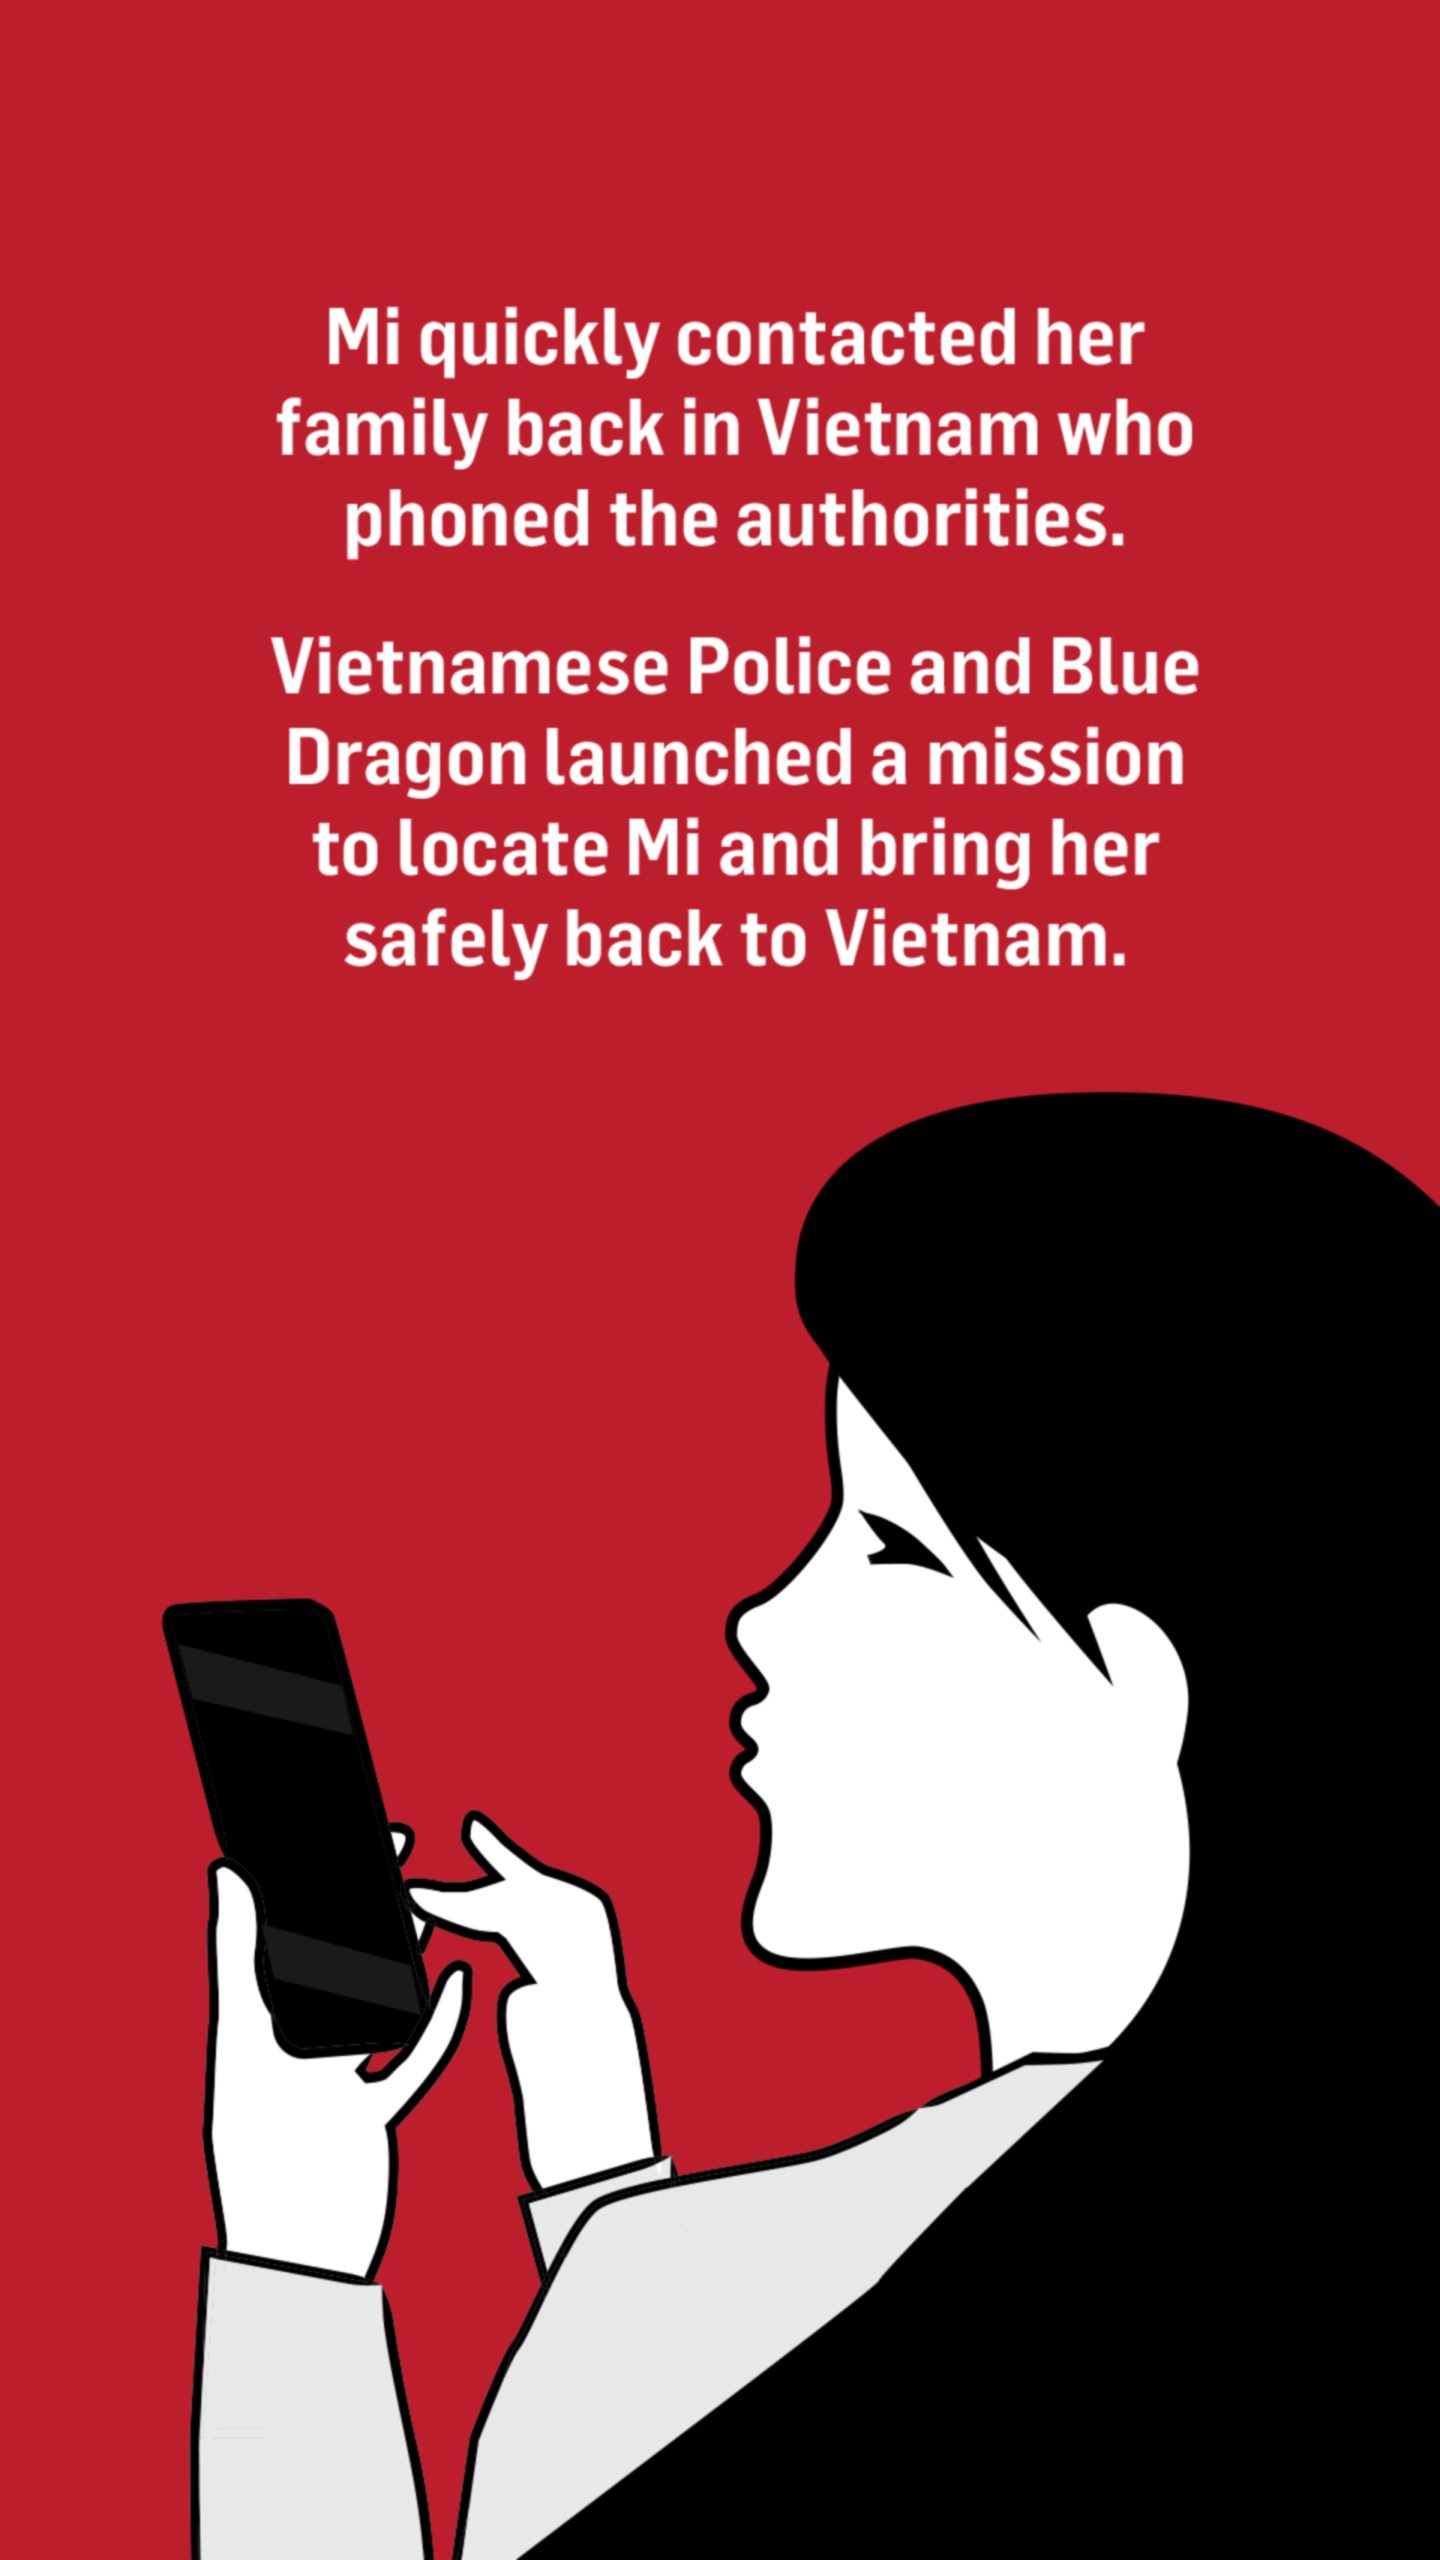 An illustration of a woman looking at her phone. Words above the image read: Mi quickly contacted her family back in Vietnam who phoned the authorities.

Vietnamese Police and Blue Dragon launched a mission to locate her and bring her safely back to Vietnam.